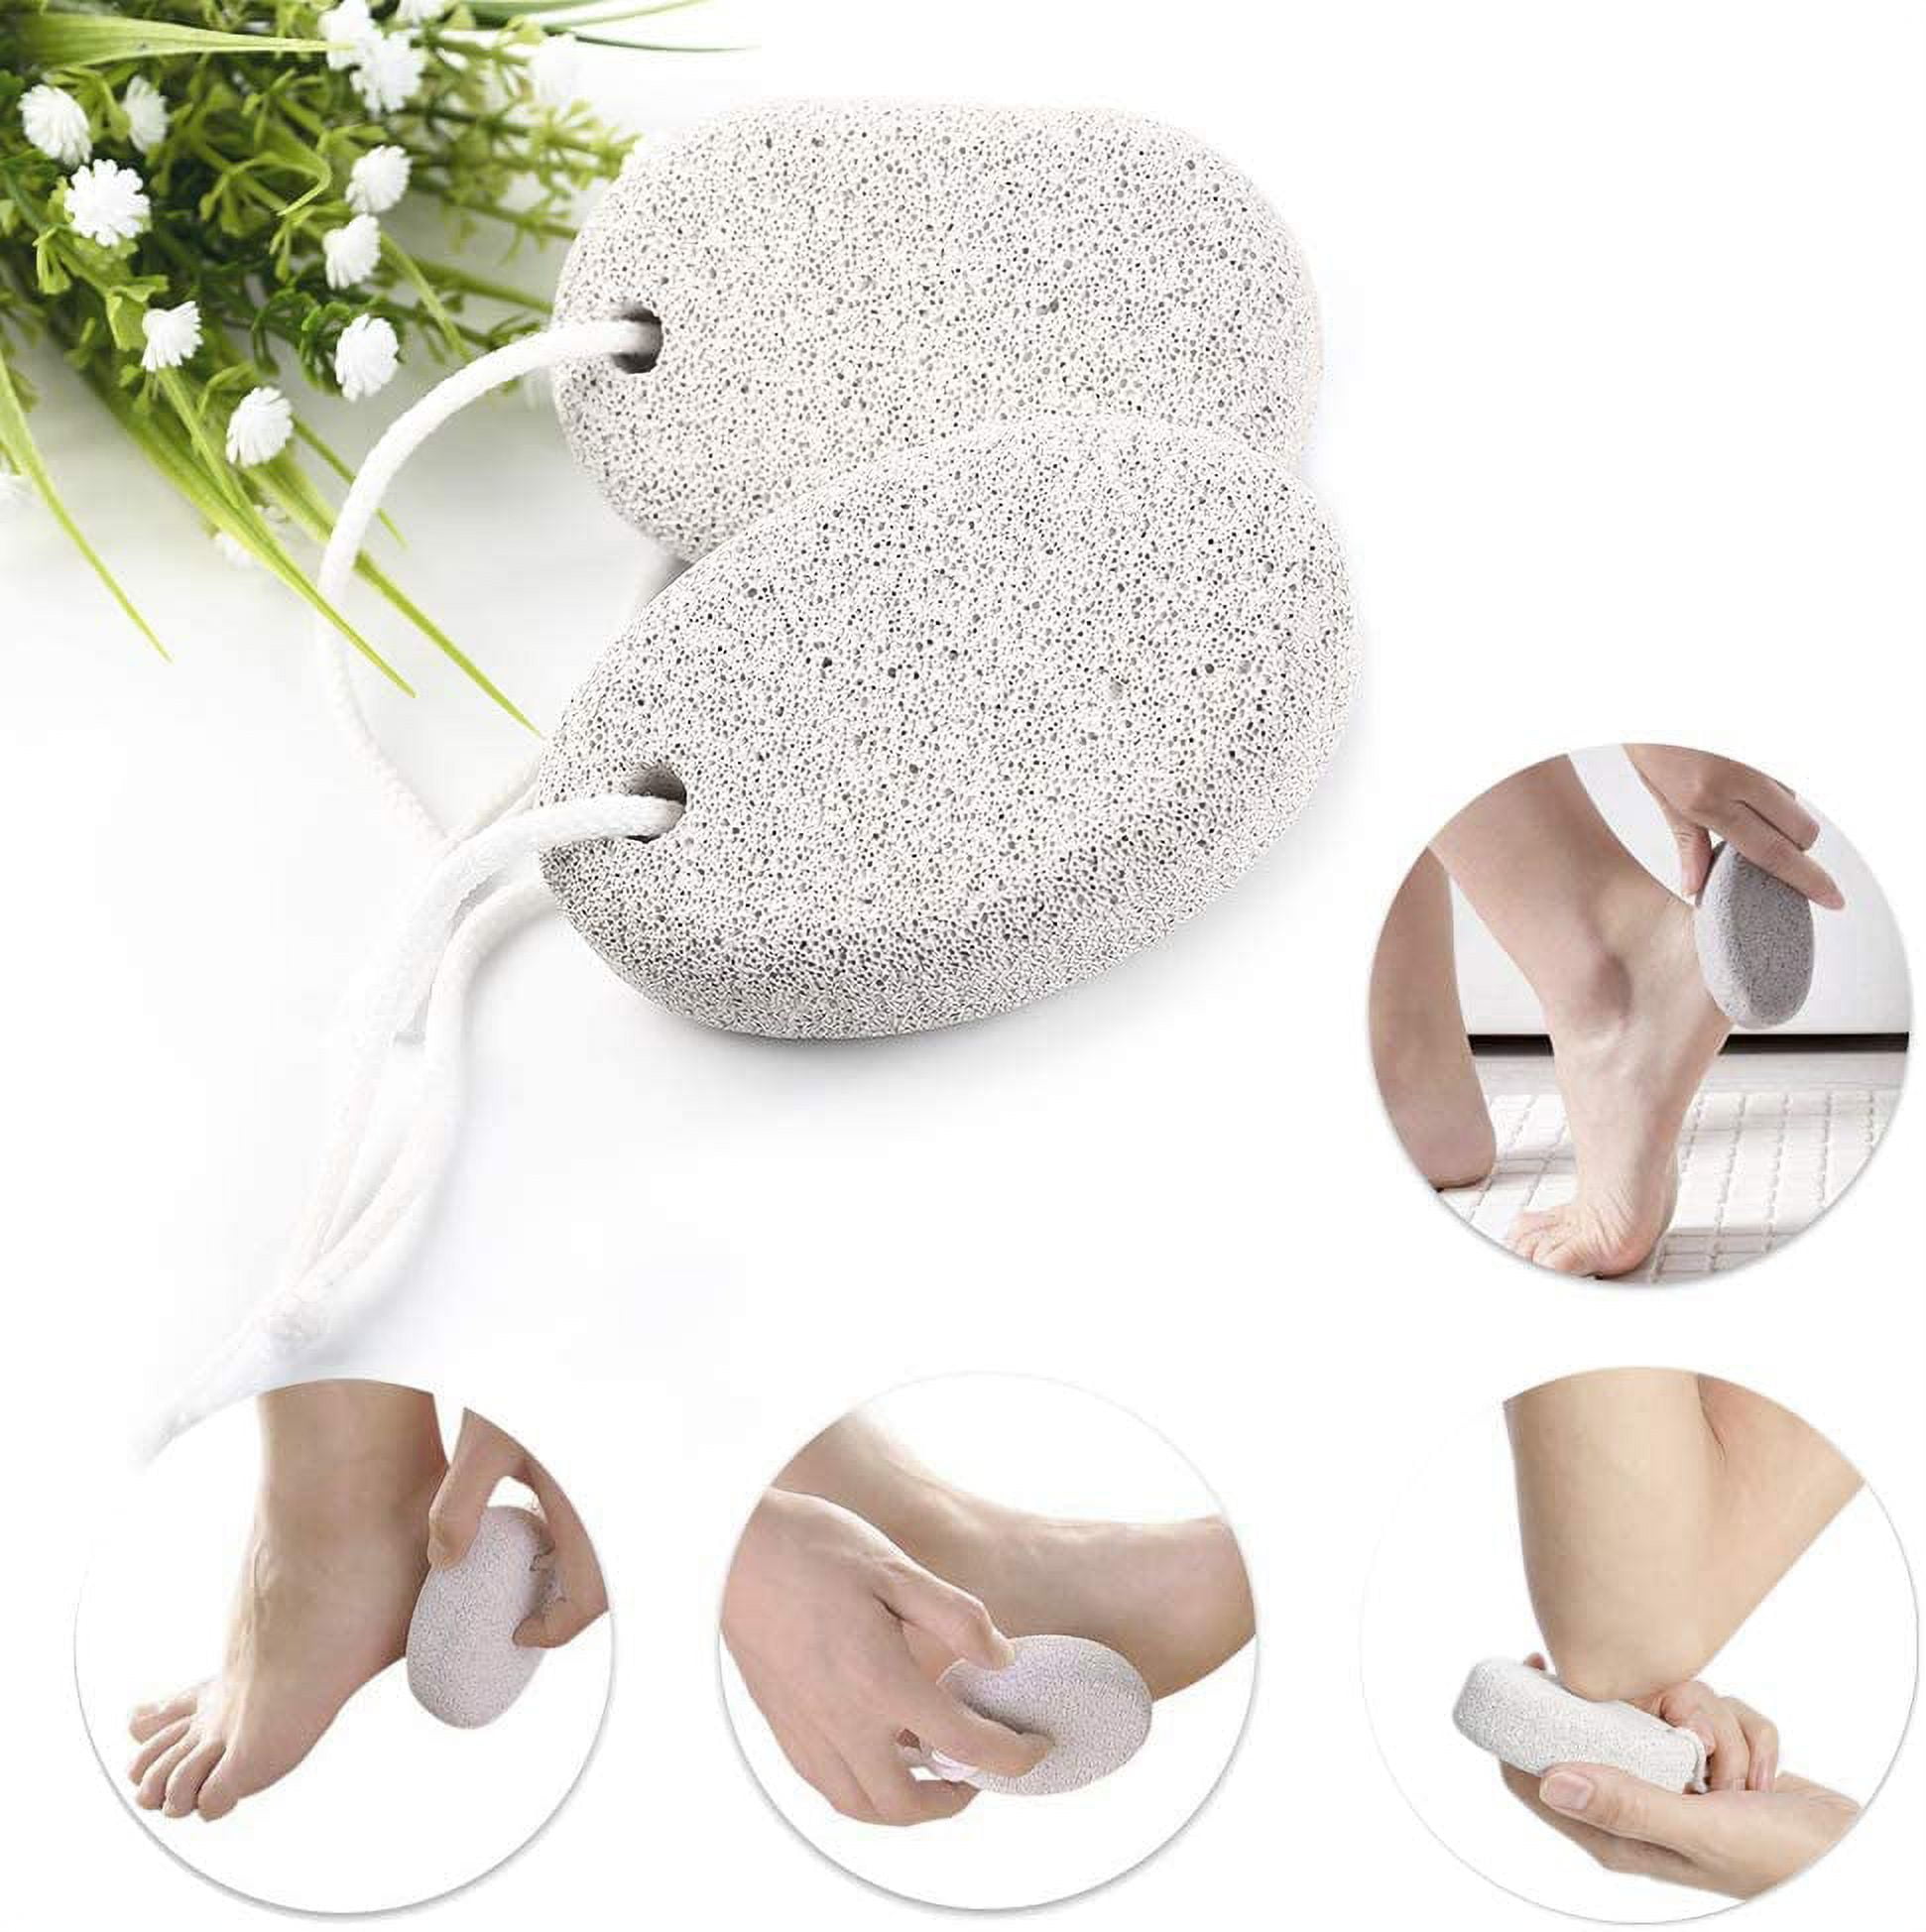 Vridale Pumice Stones for Feet Lava Pumice Stone Foot File Callus Removal  Foot Scrubber for Hands Care Foot Exfoliation Dead Skin Remover with Handle